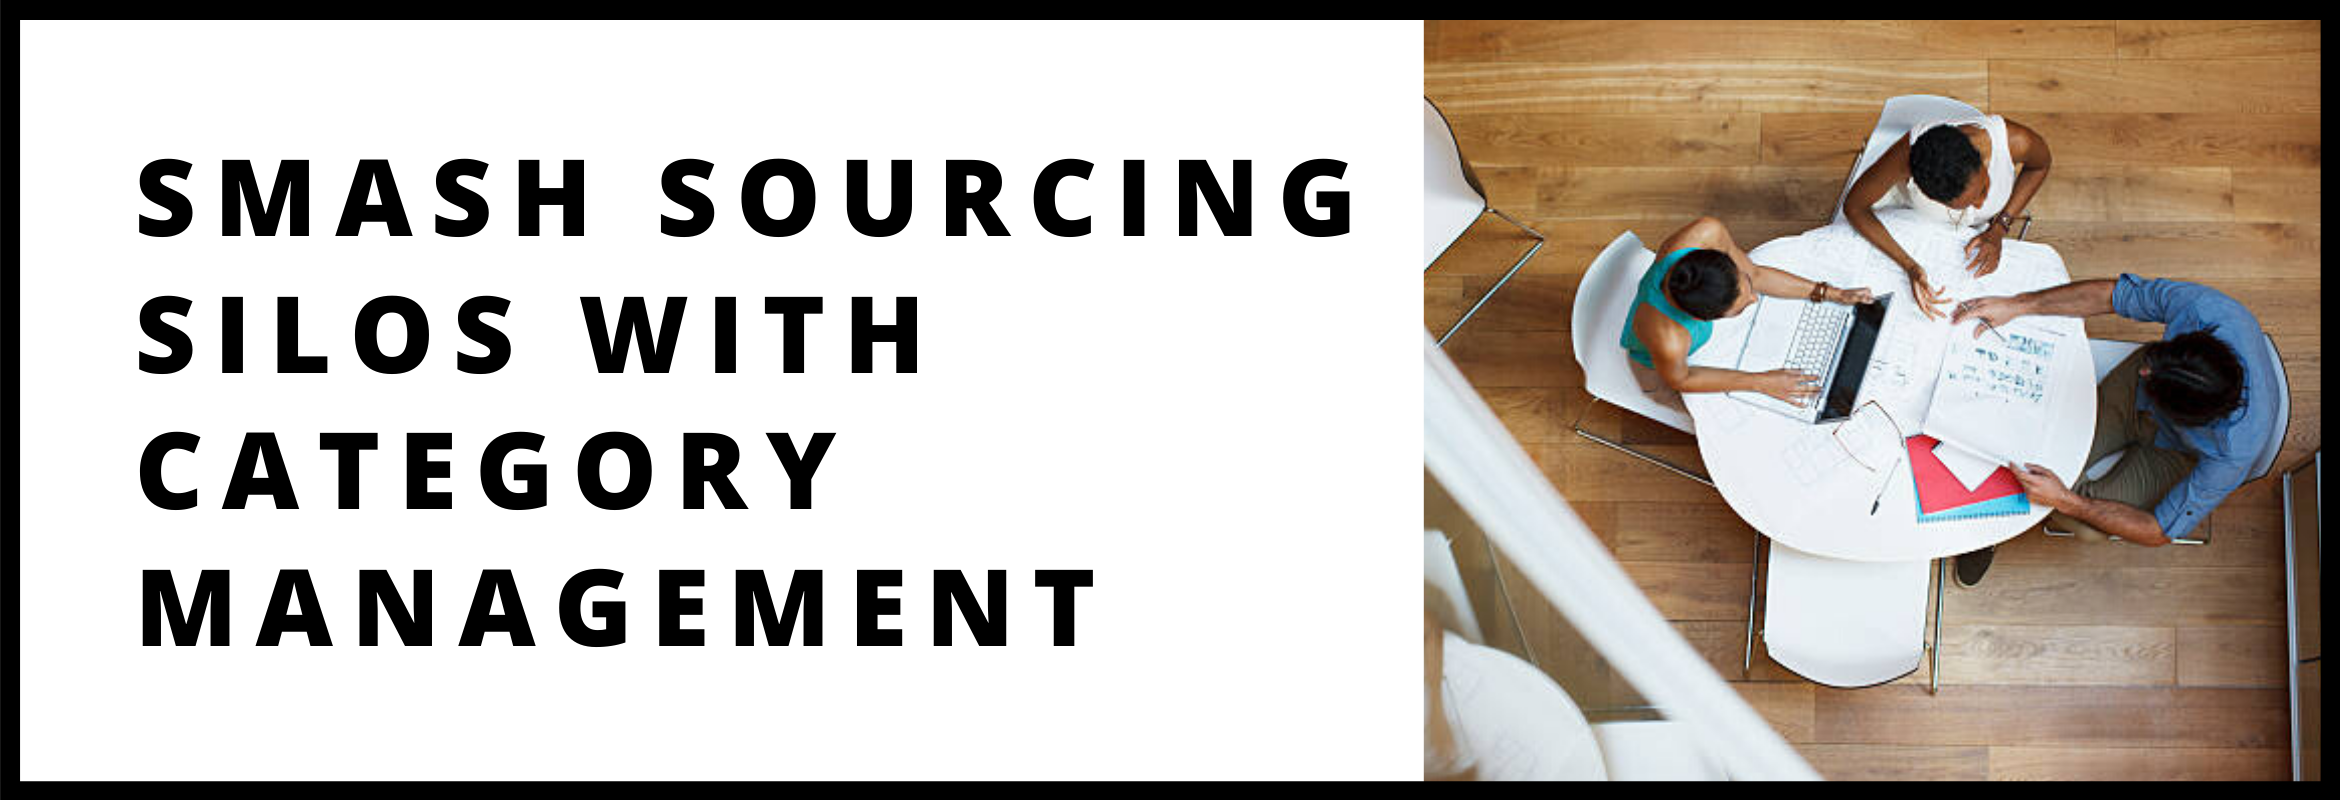 Smash Sourcing Silos with Category Management